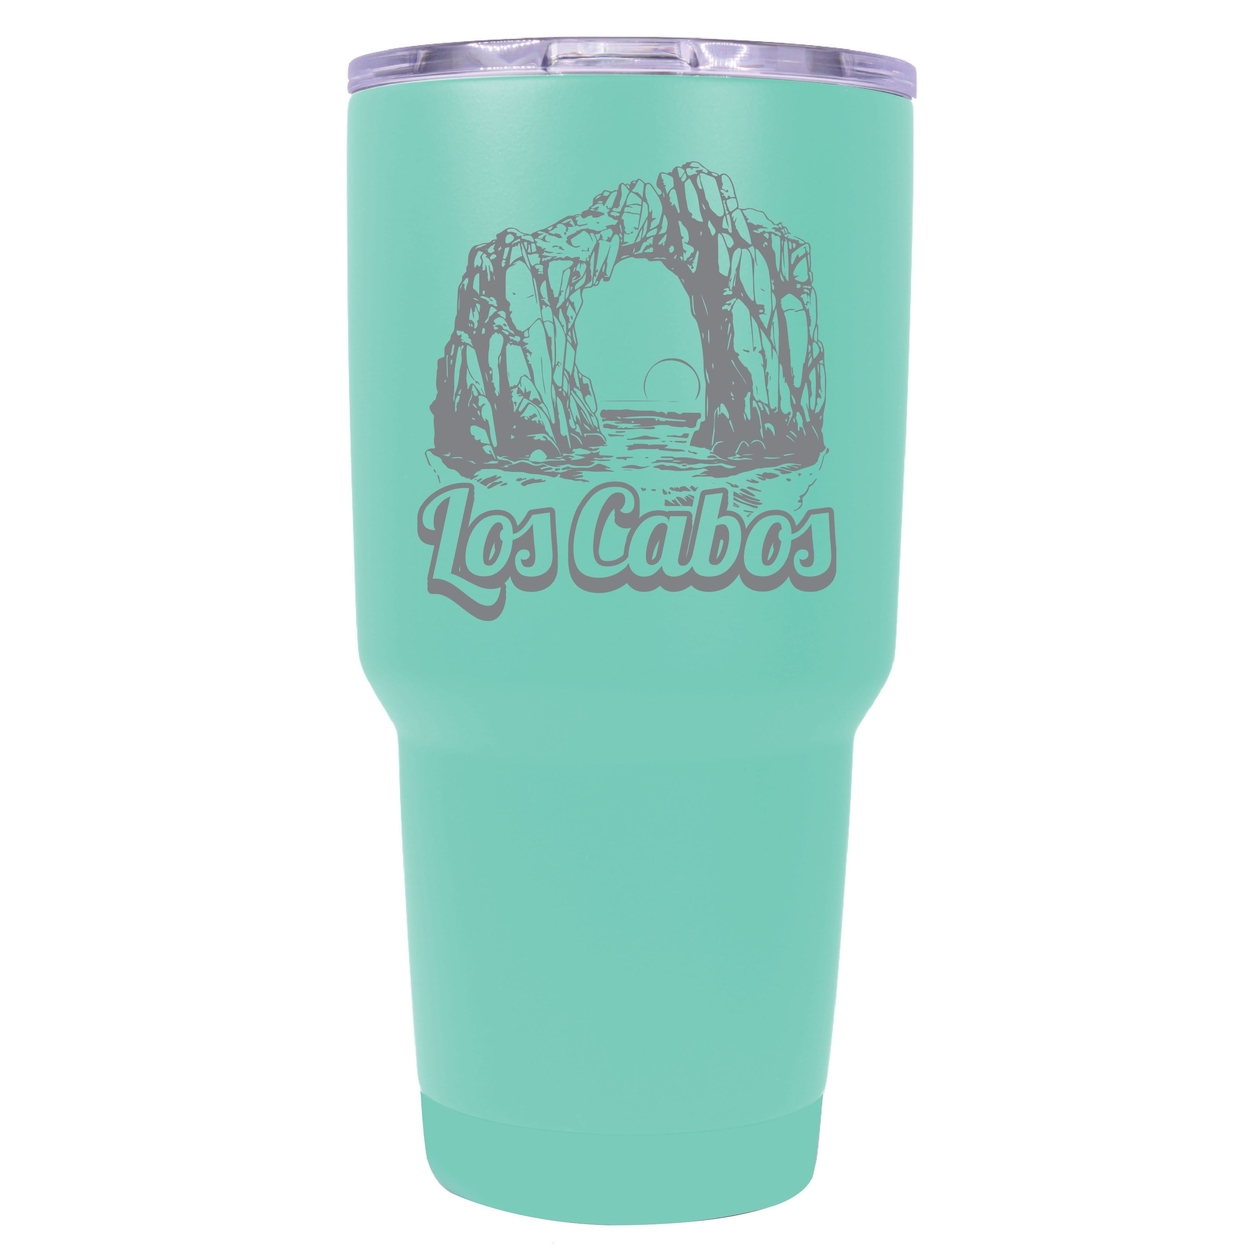 Los Cabos Mexico Souvenir 24 Oz Engraved Insulated Stainless Steel Tumbler - Seafoam,,2-Pack